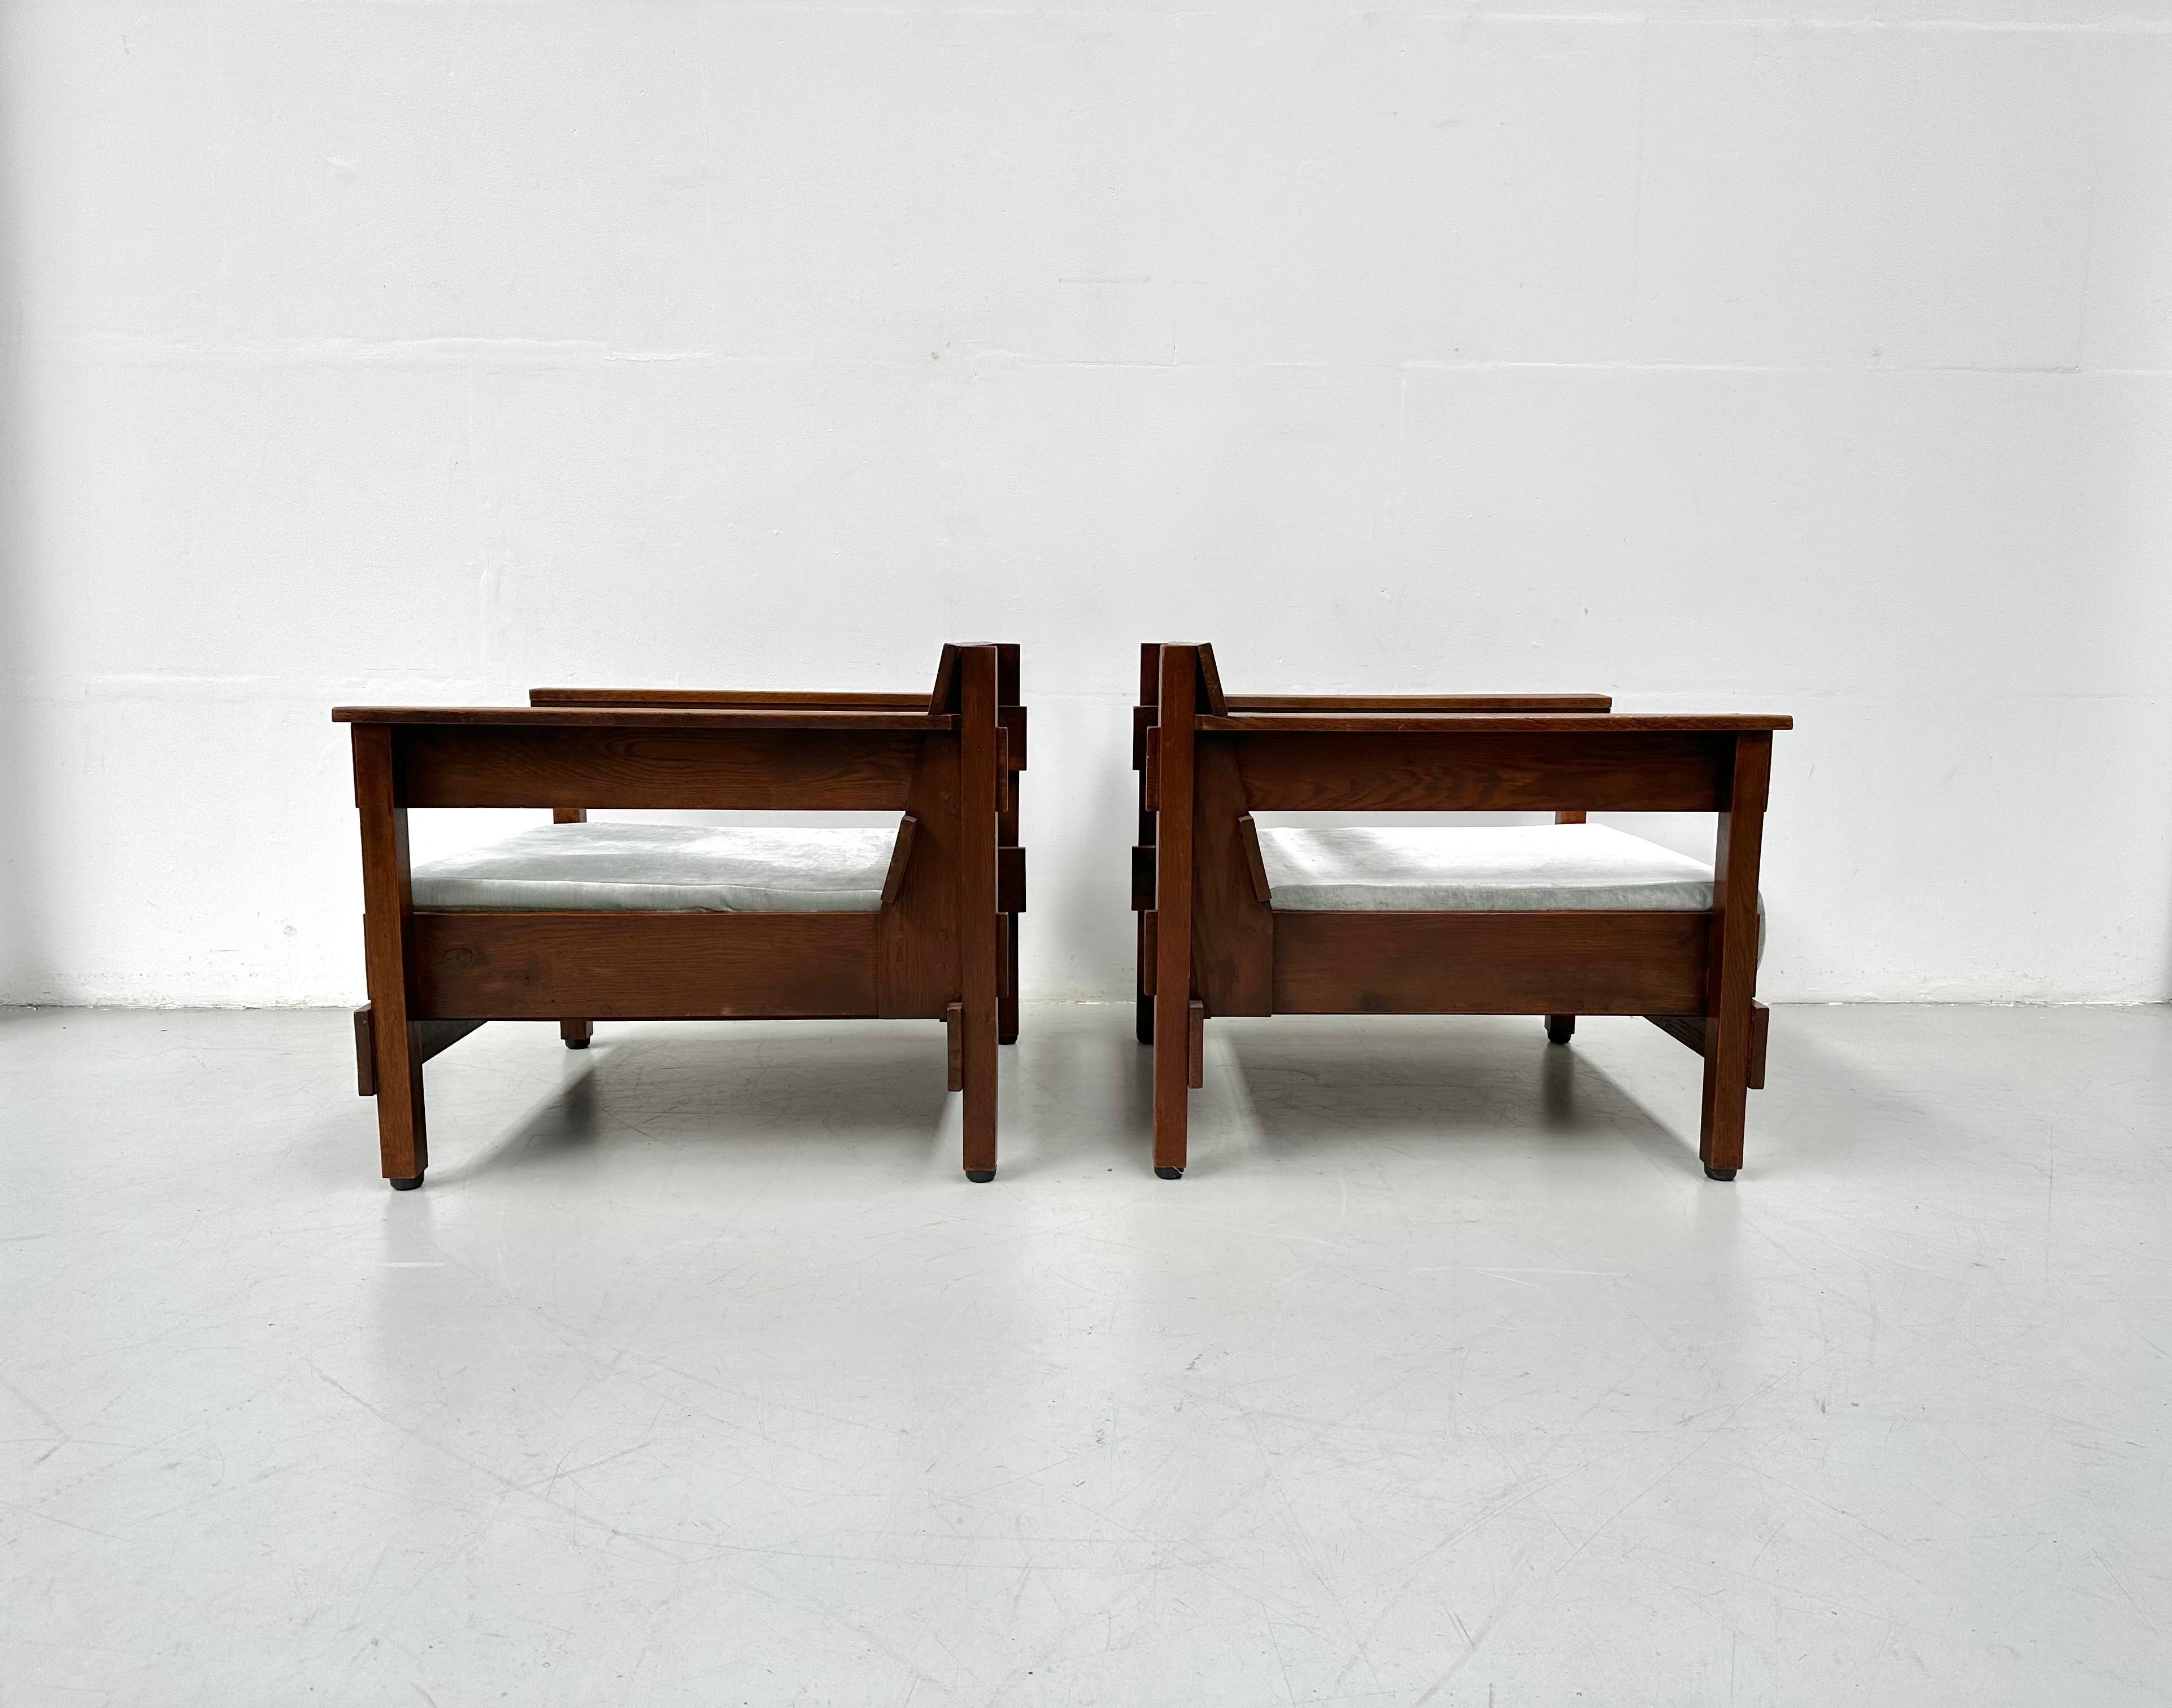 Dutch Mid Century Brutalist Oak Armchairs by Paul Bromberg for Metz & Co, 1950s. 1